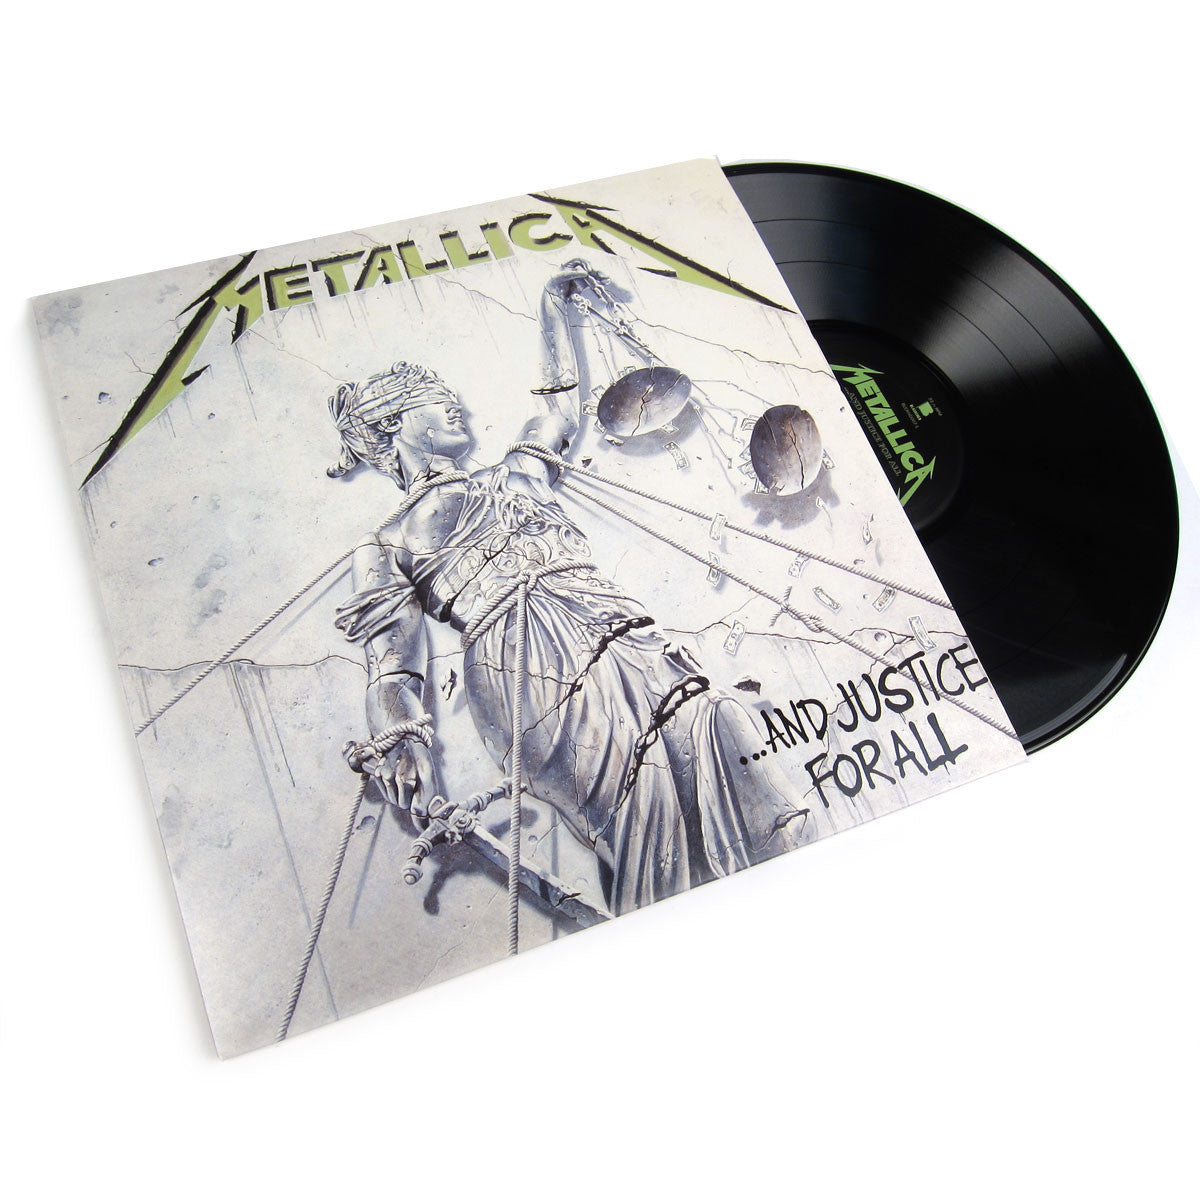 Metallica: And Justice For All Vinyl 2LP —